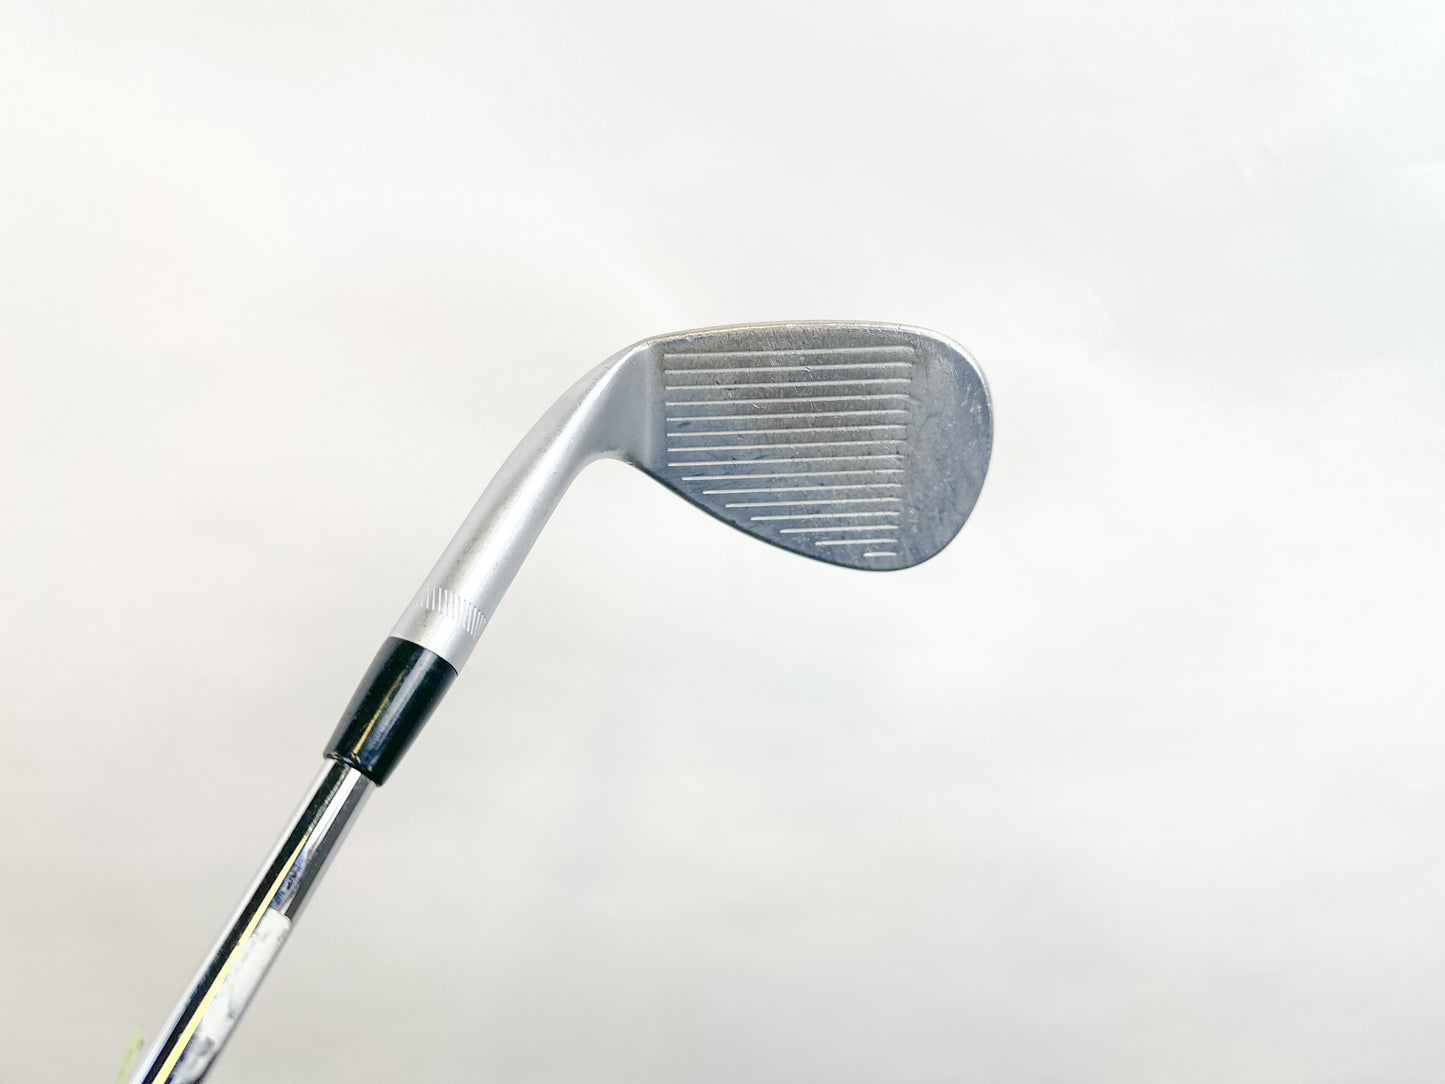 Used Titleist Vokey Spin Milled Tour Chrome '09 Lob Wedge - Right-Handed - 60 Degrees - Stiff Flex-Next Round